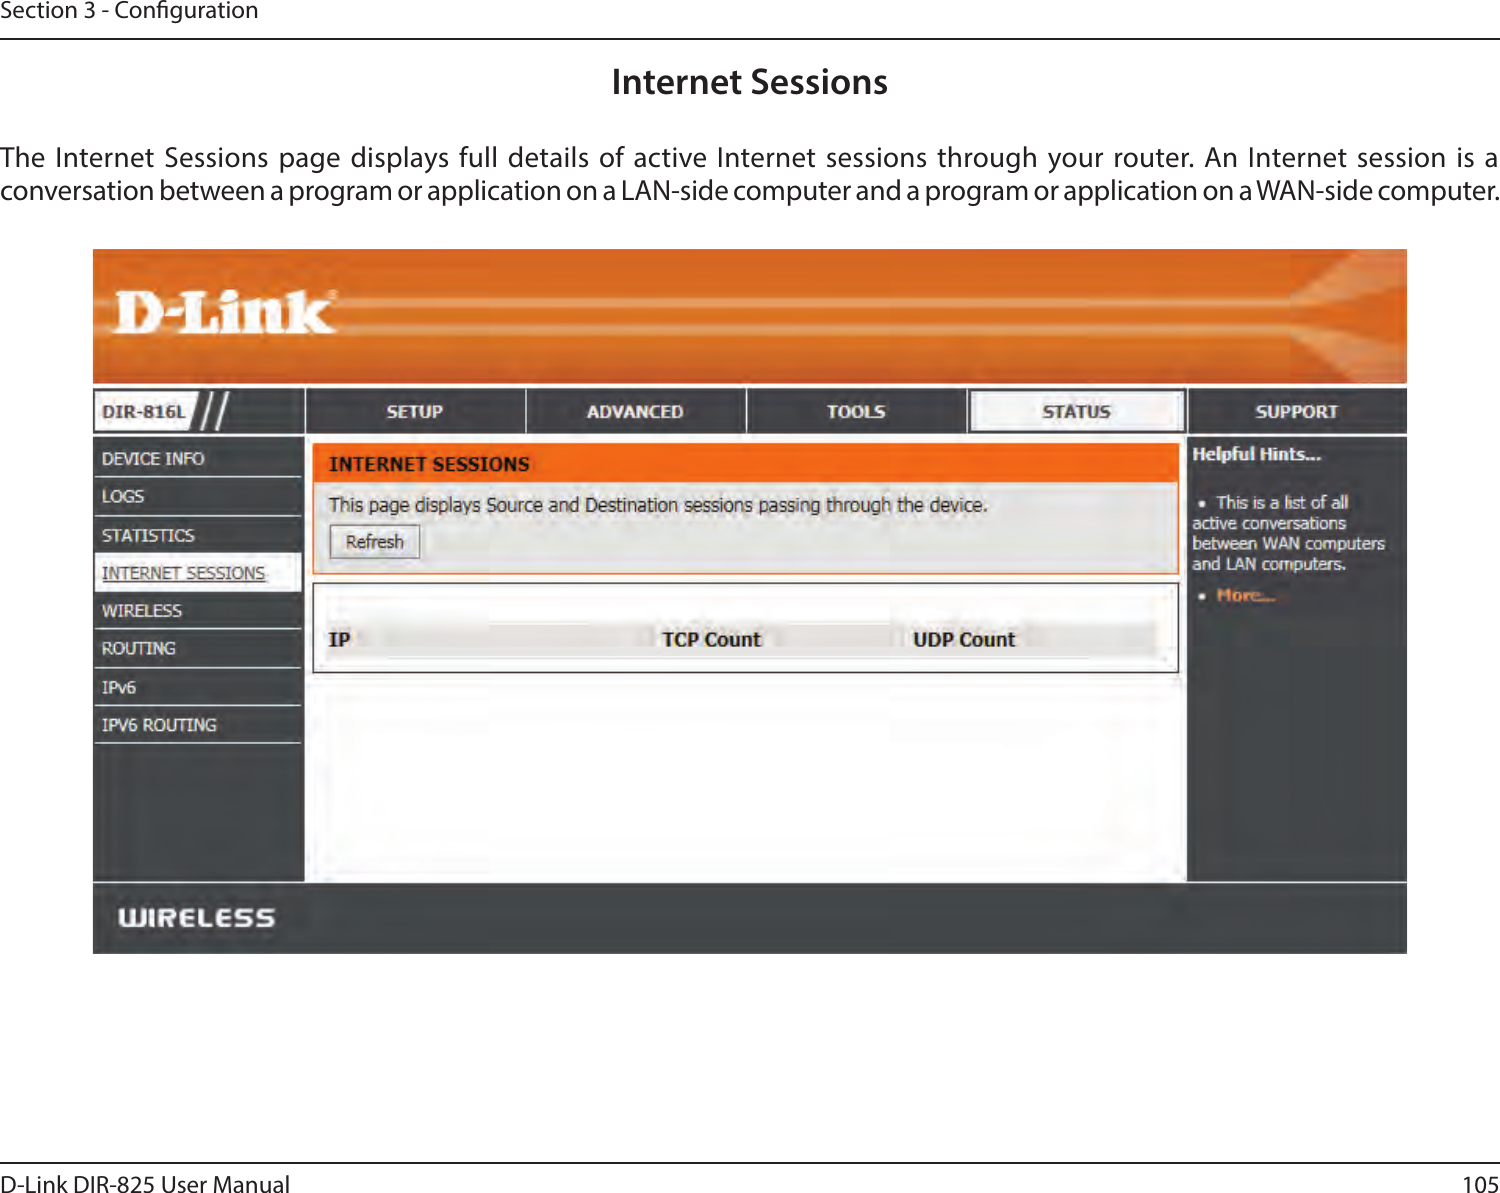 105D-Link DIR-825 User ManualSection 3 - CongurationInternet SessionsThe Internet Sessions page displays full details of active Internet sessions through your router. An Internet session is a conversation between a program or application on a LAN-side computer and a program or application on a WAN-side computer. 